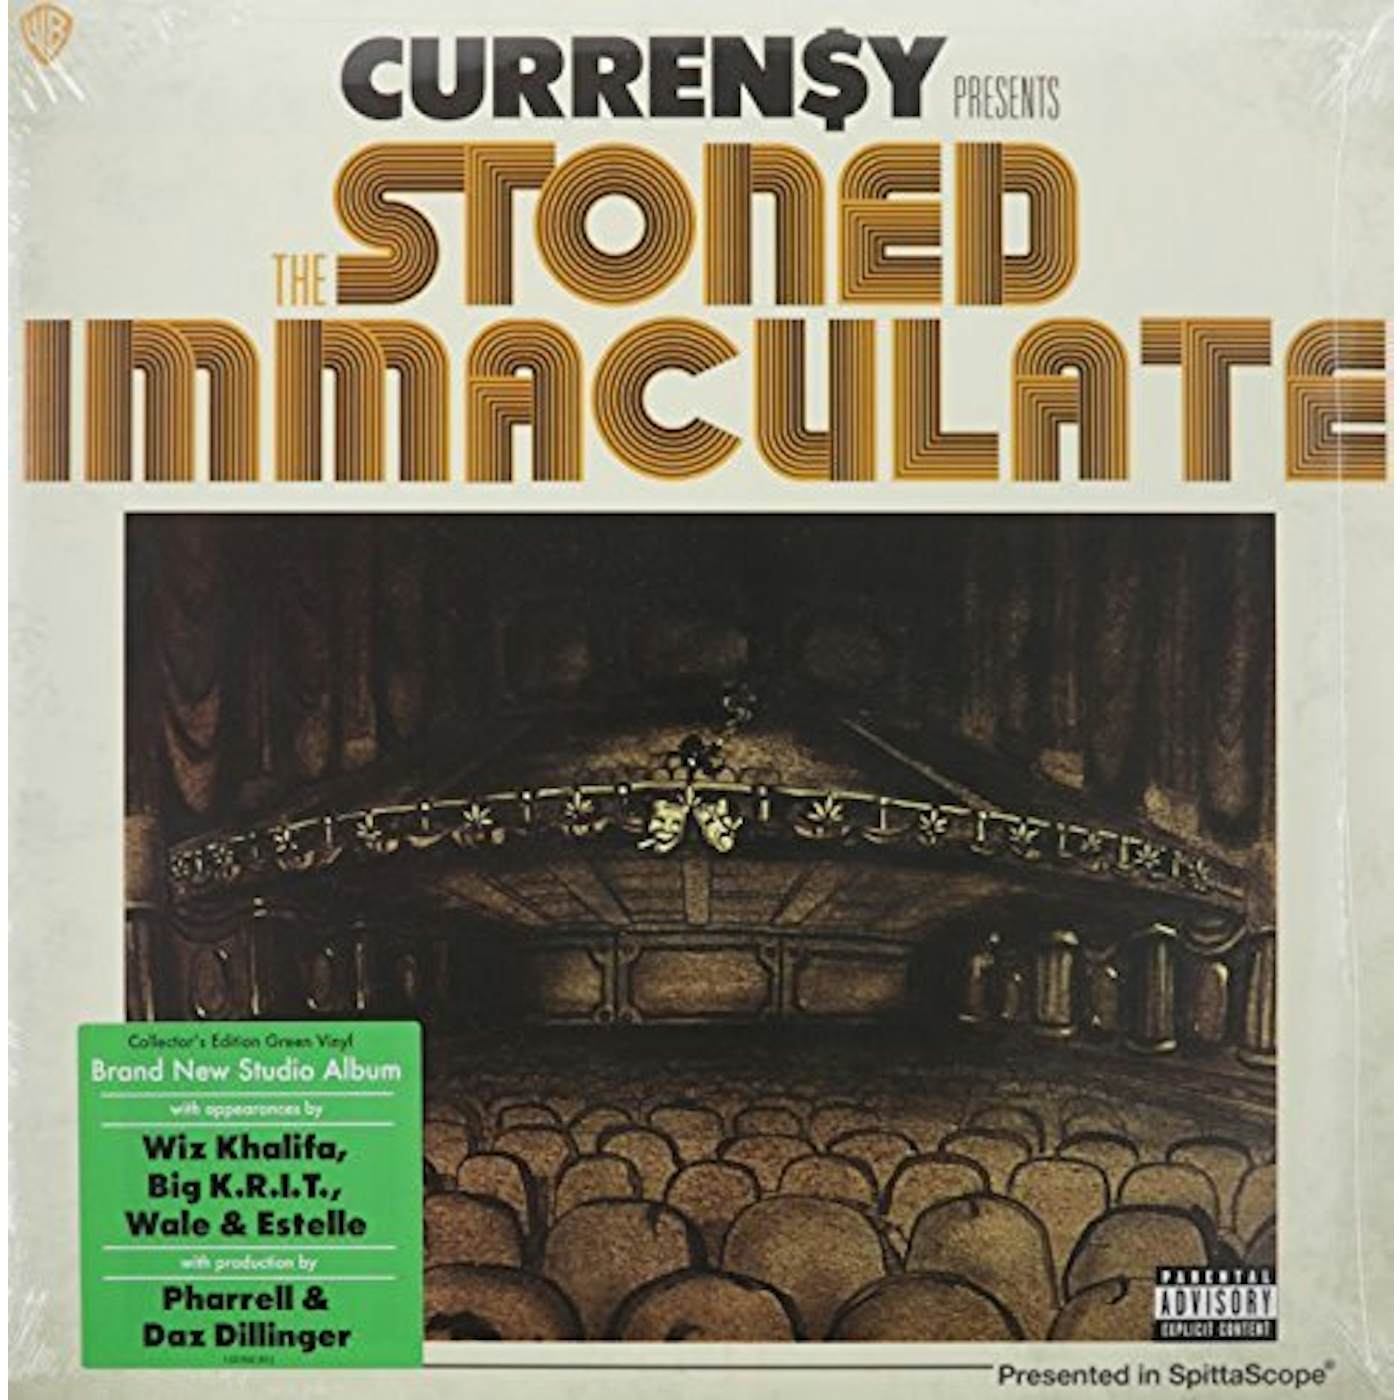 Curren$y STONED IMMACULATE Vinyl Record